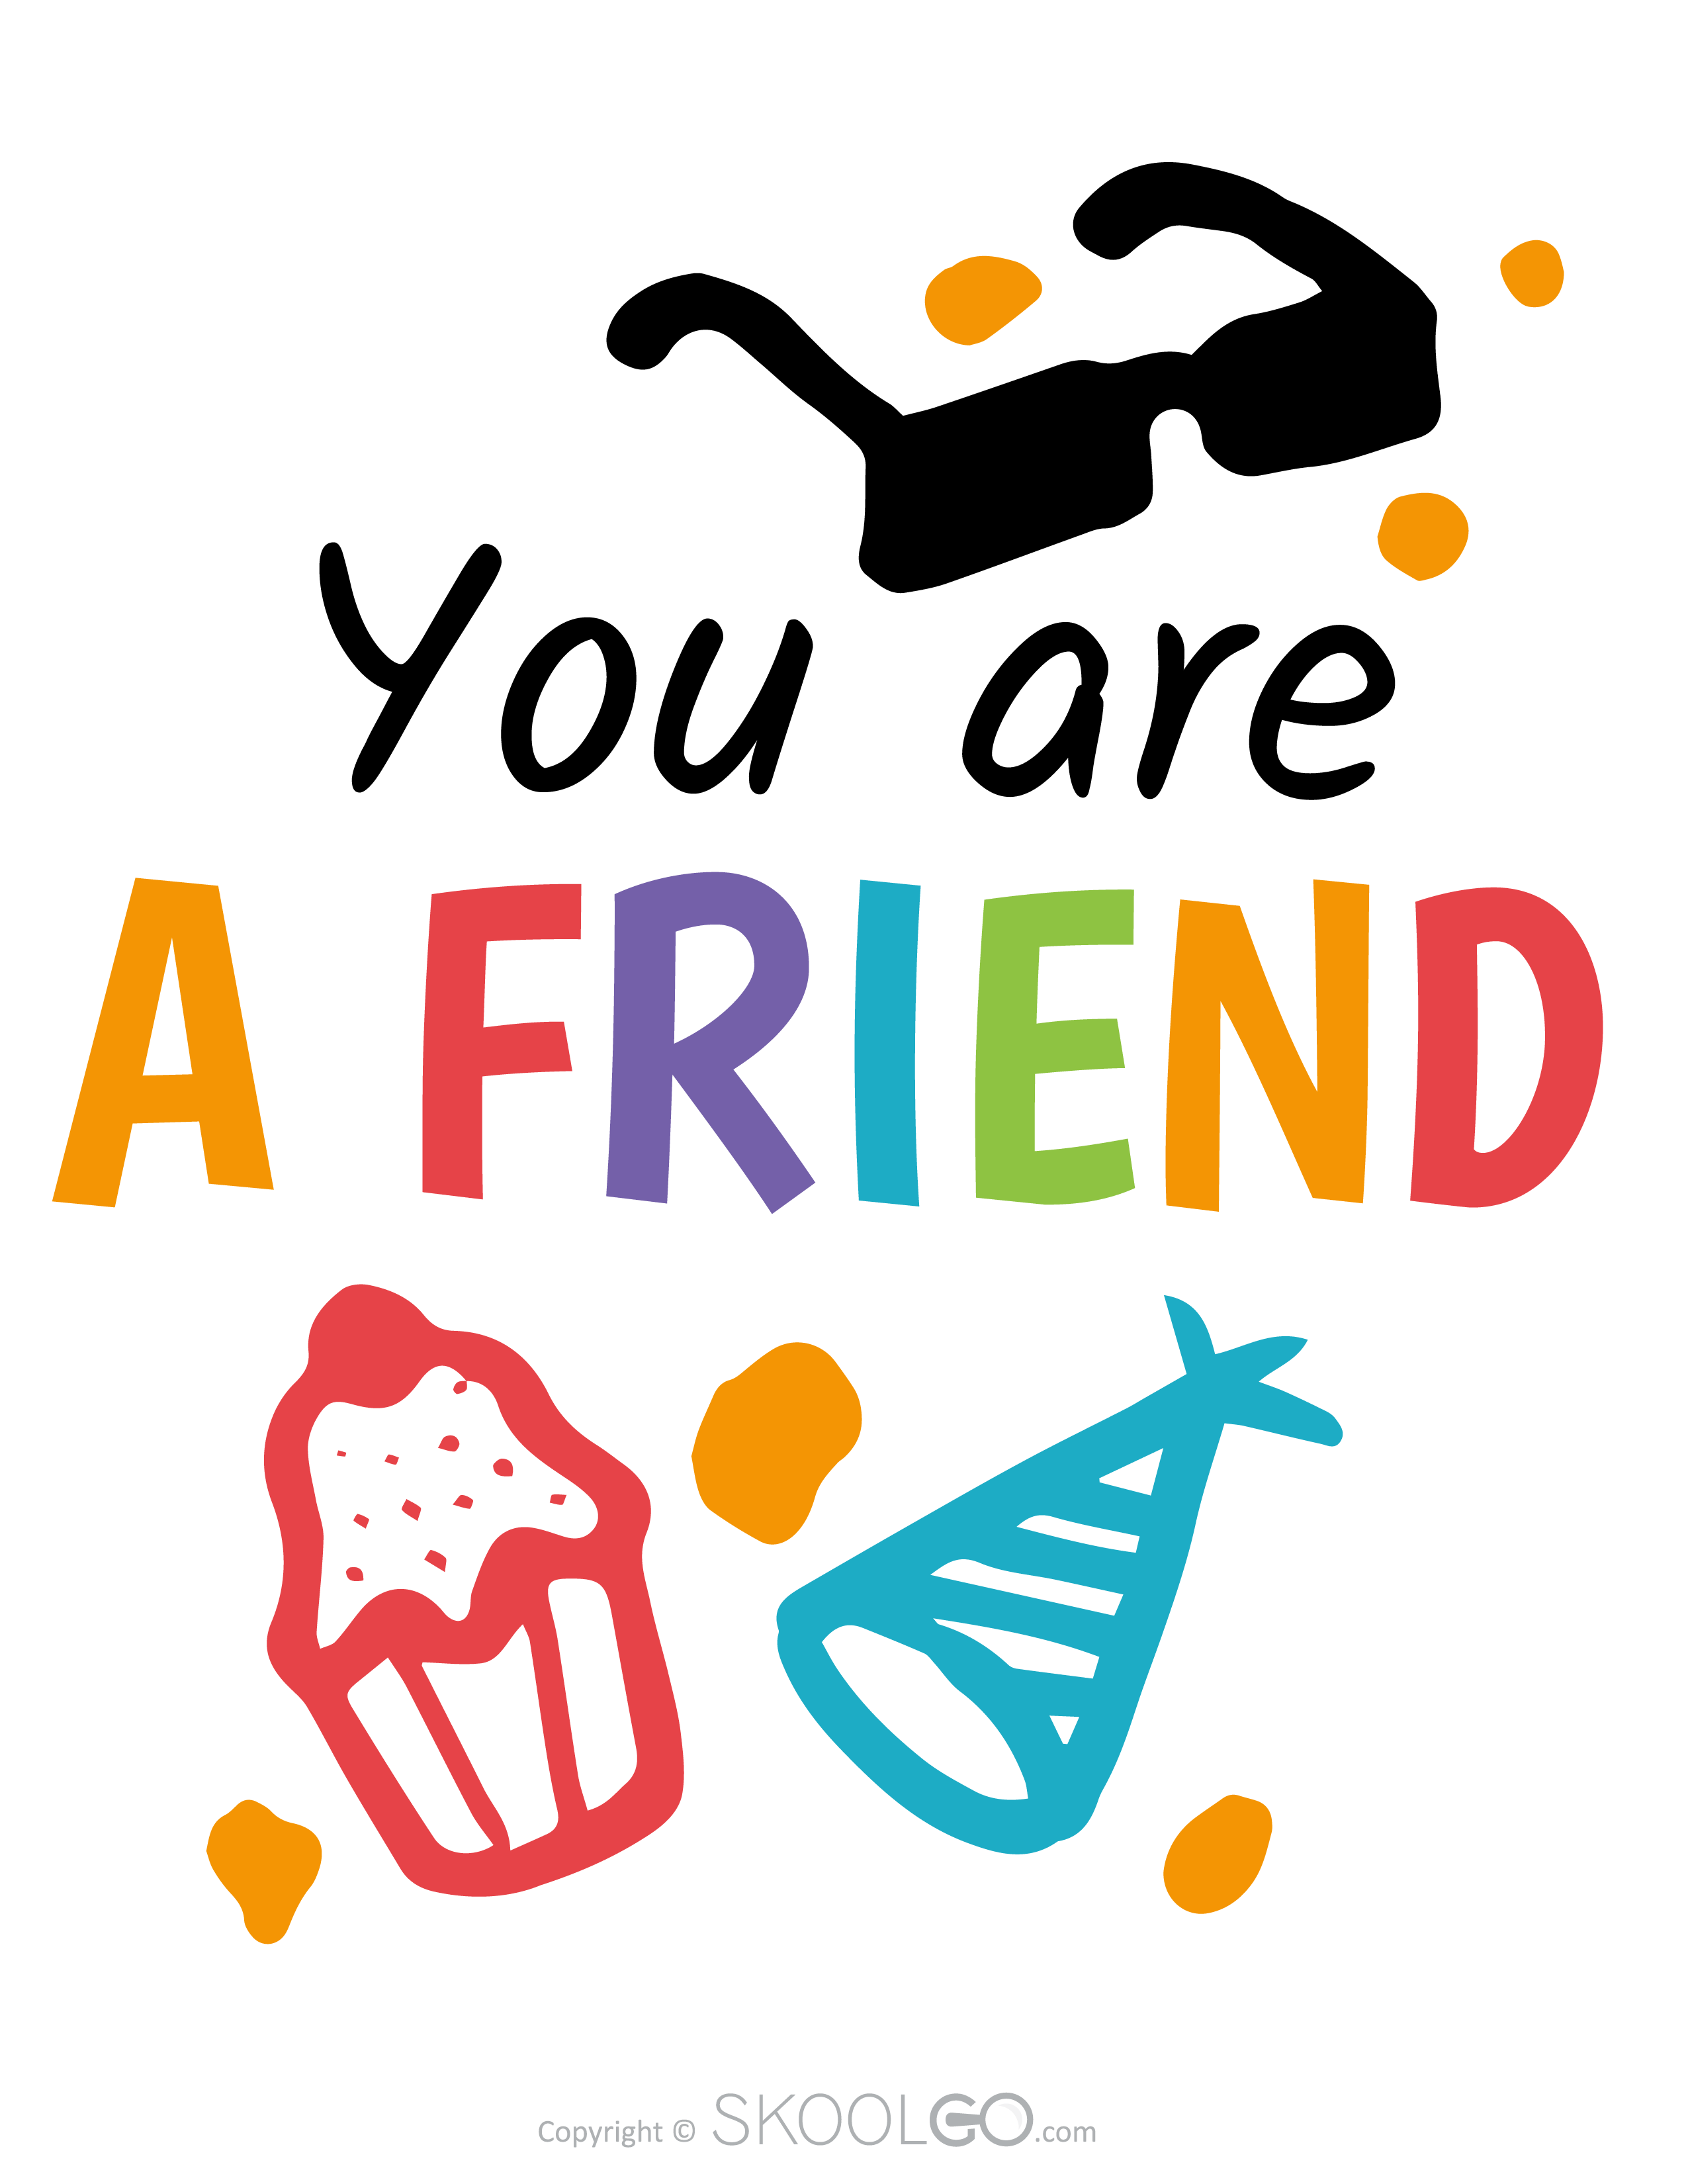 You Are A Friend - Free Poster